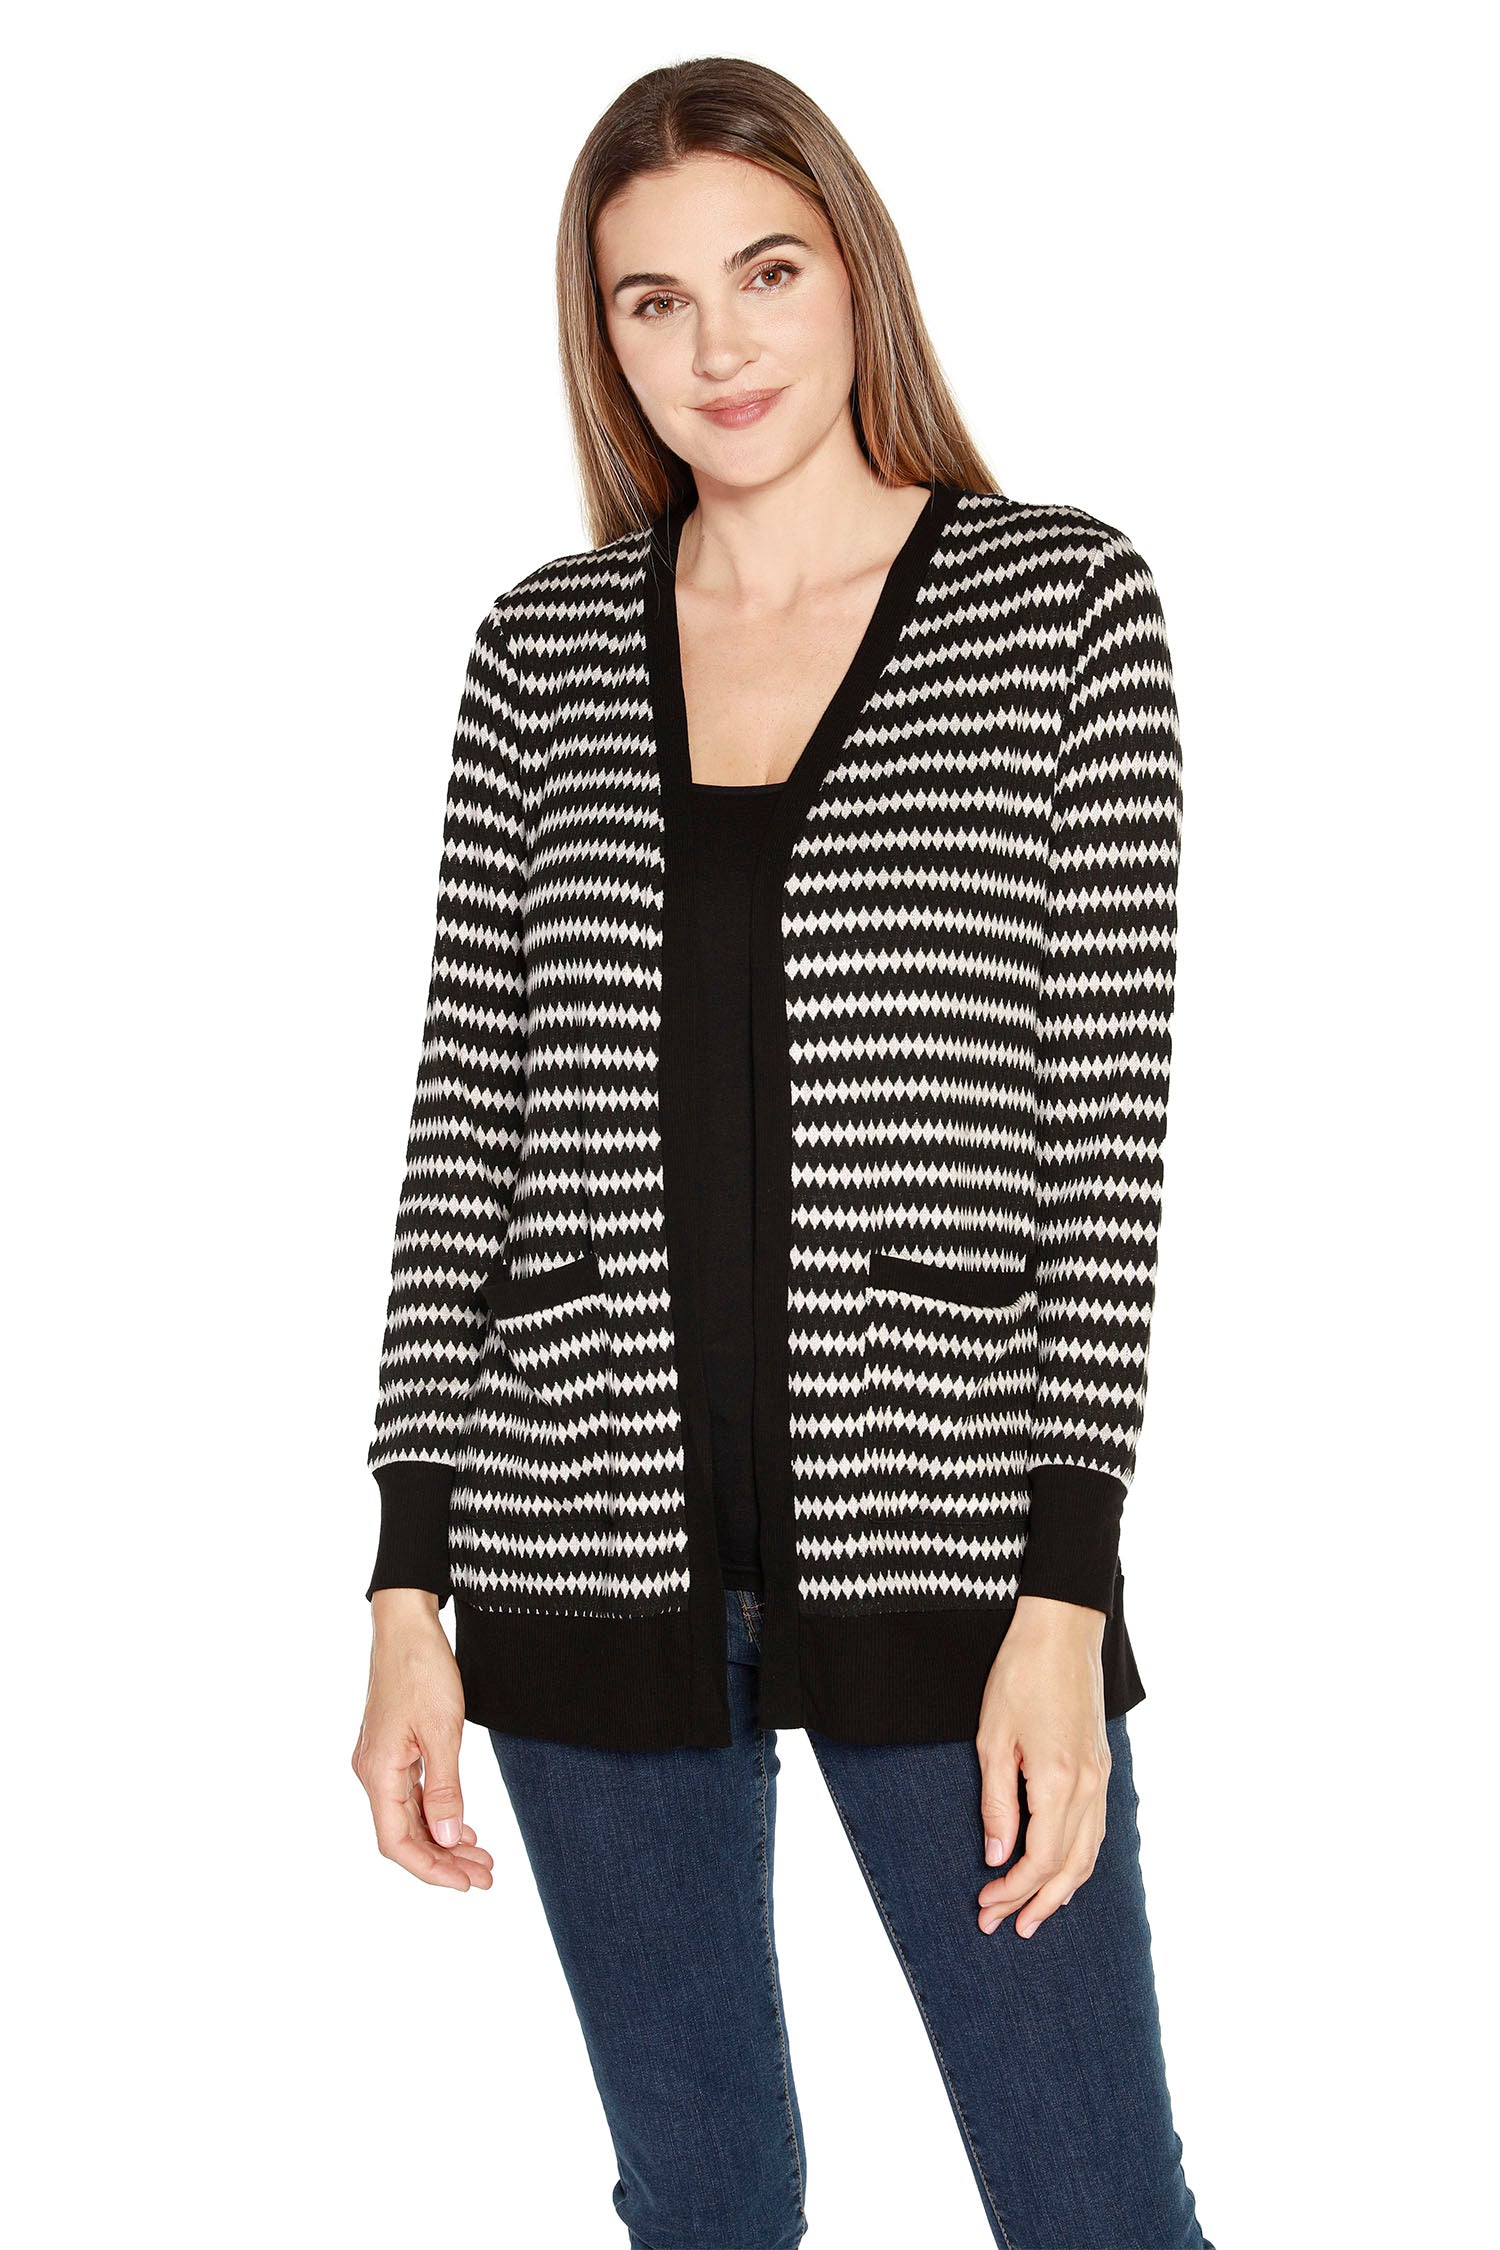 Women's Fashion Cardigan in a Soft Light Knit with a Modern Zig-Zag Stripe and Pockets